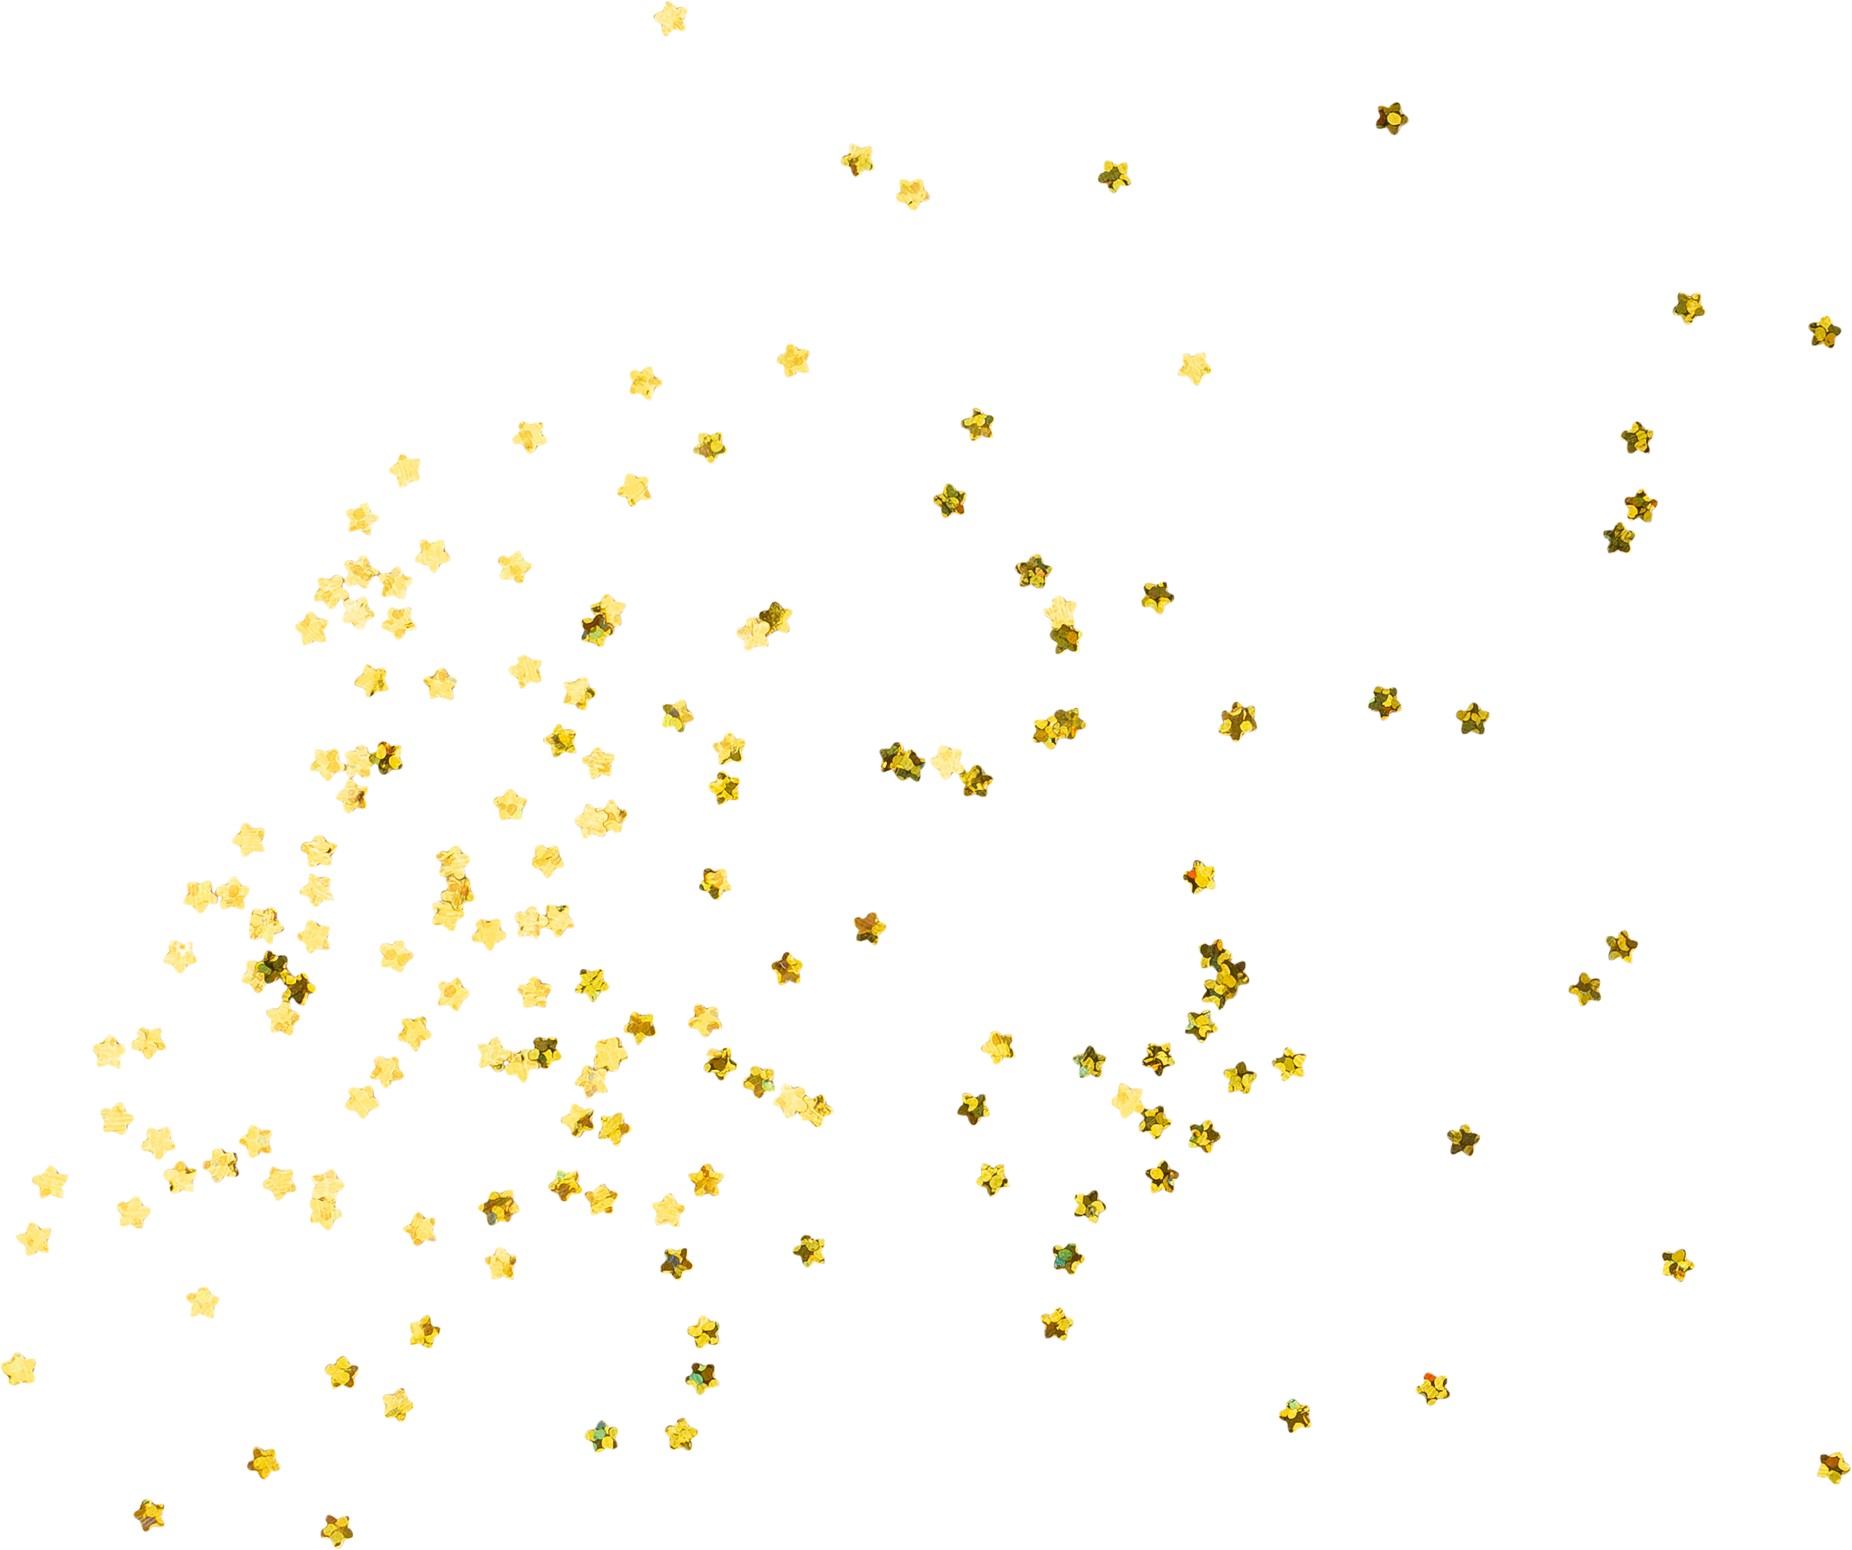 Scattered Gold Star Confetti